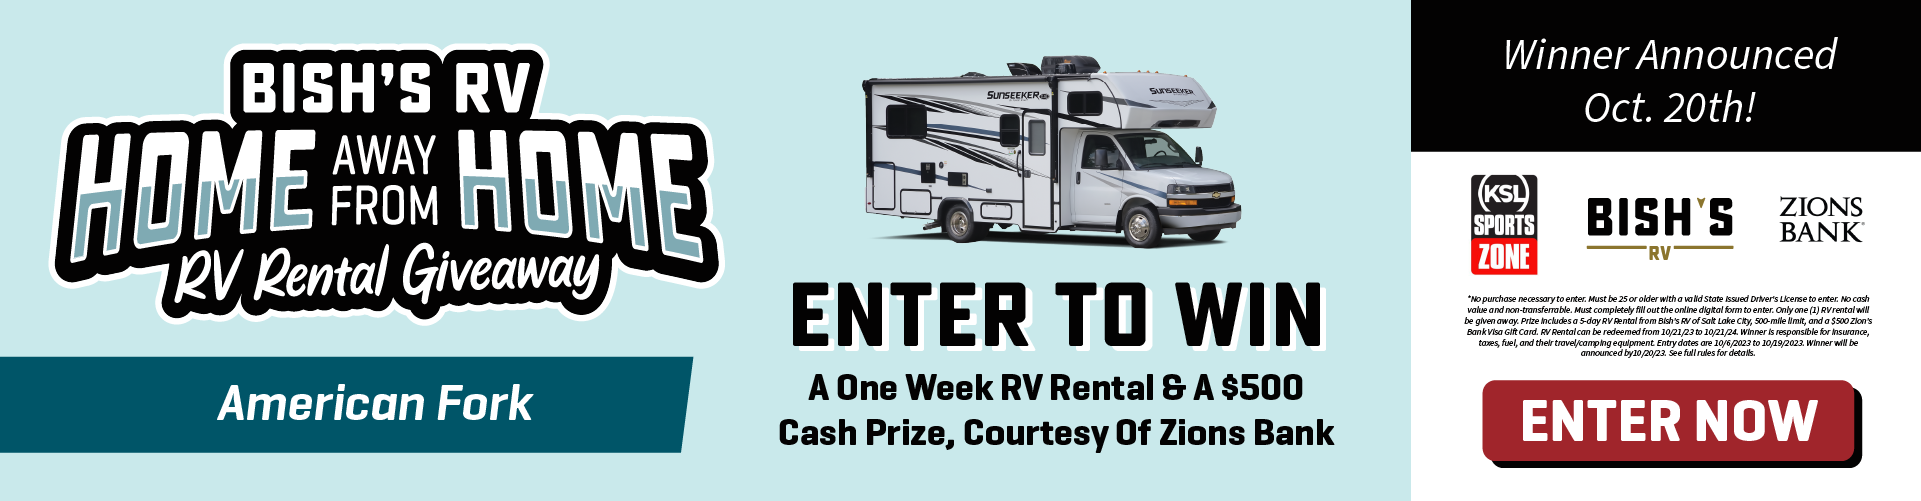 Enter To Win A RV Rental Giveaway! See rules for details.